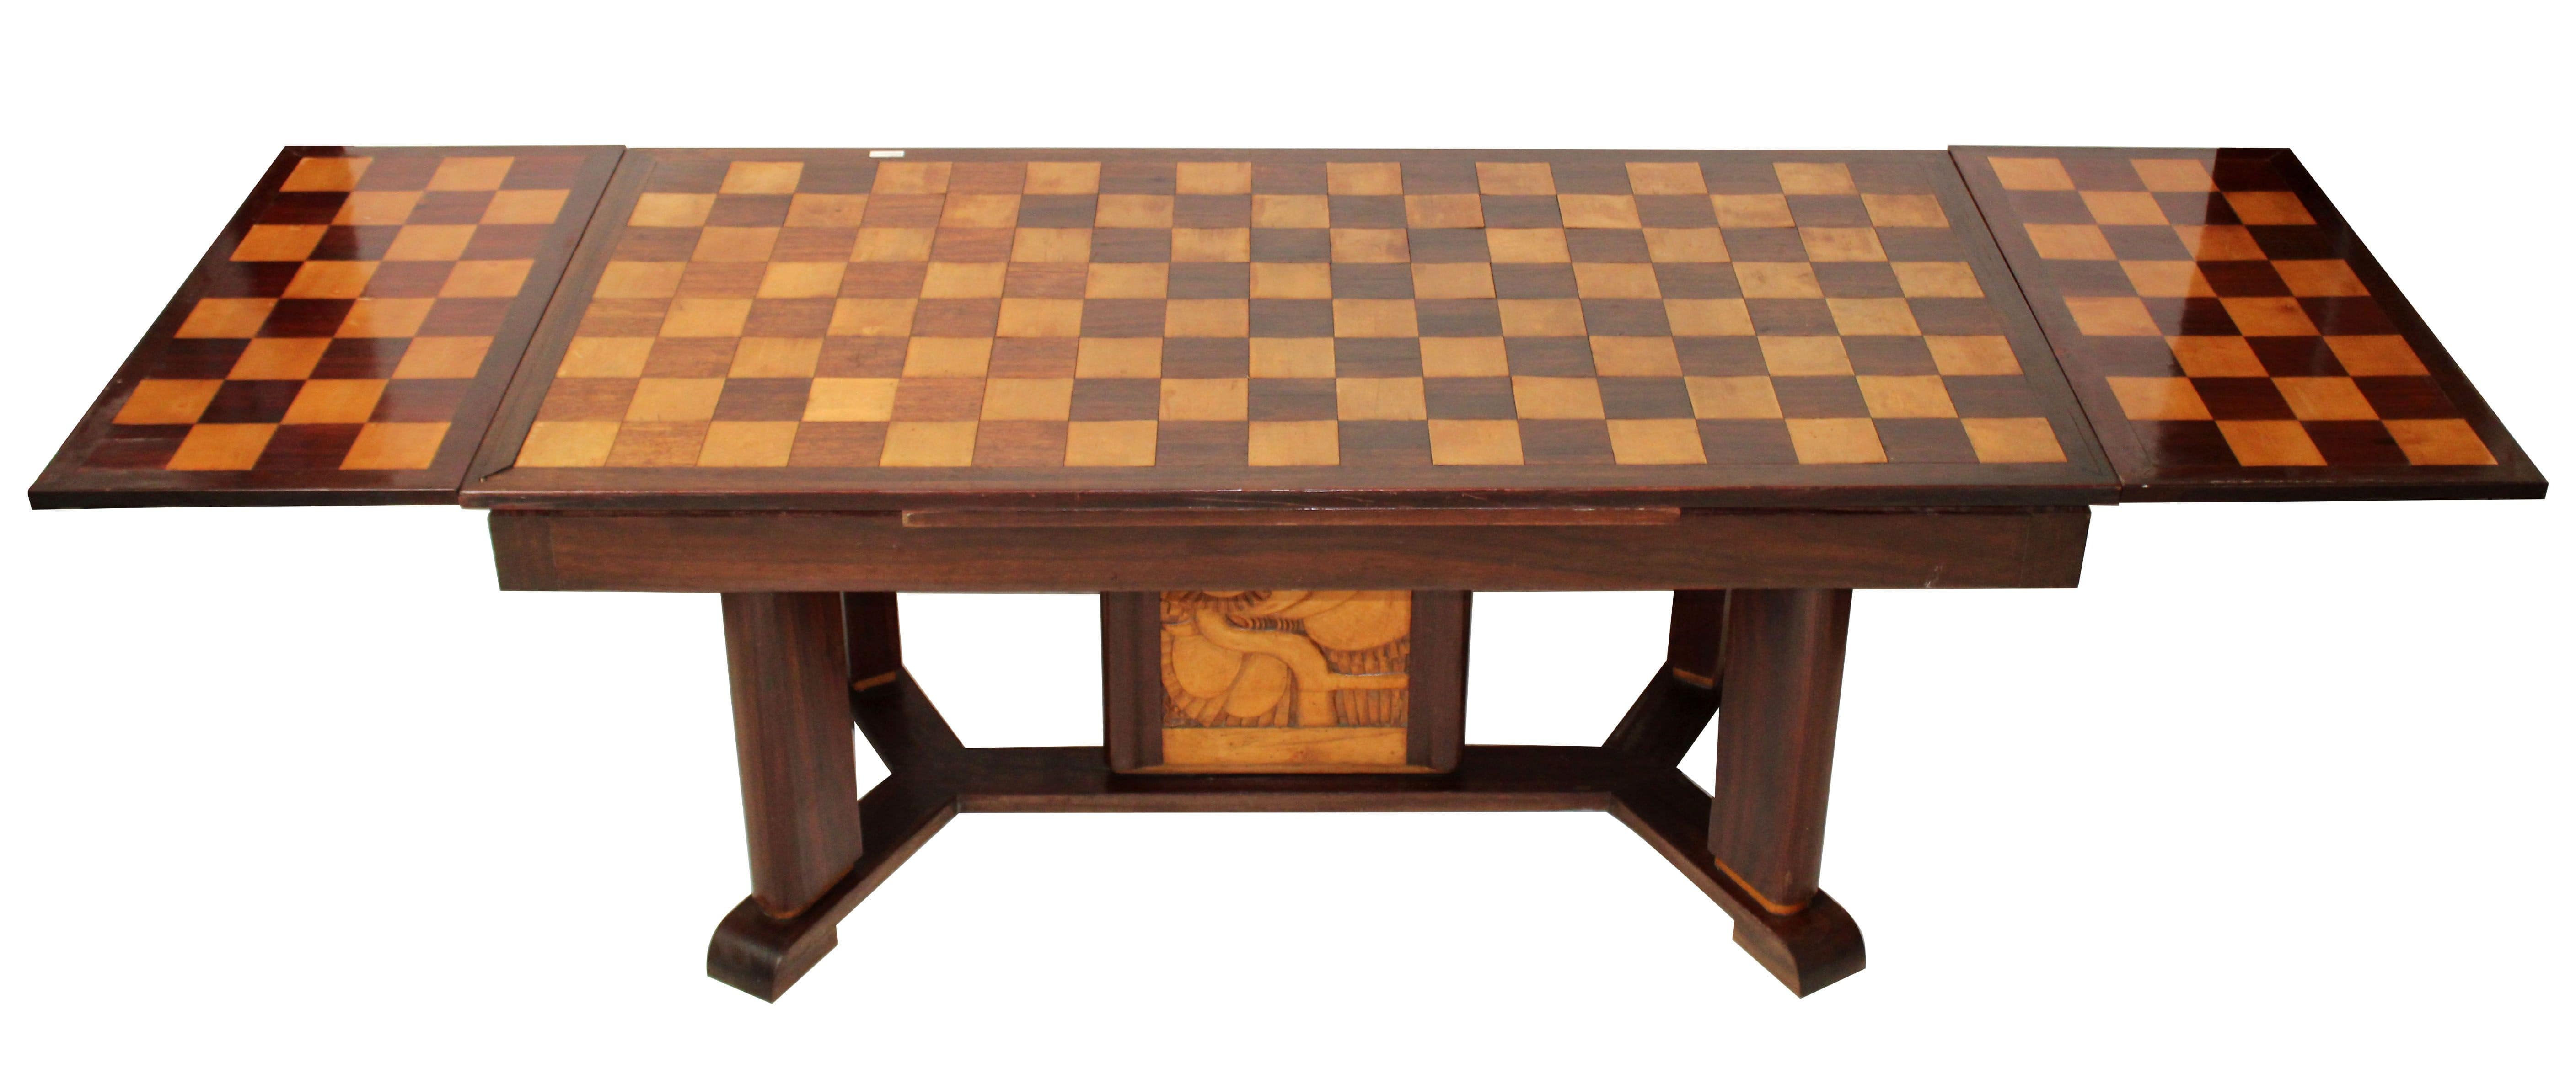 French Art Deco inlaid dining table with checkerboard top
